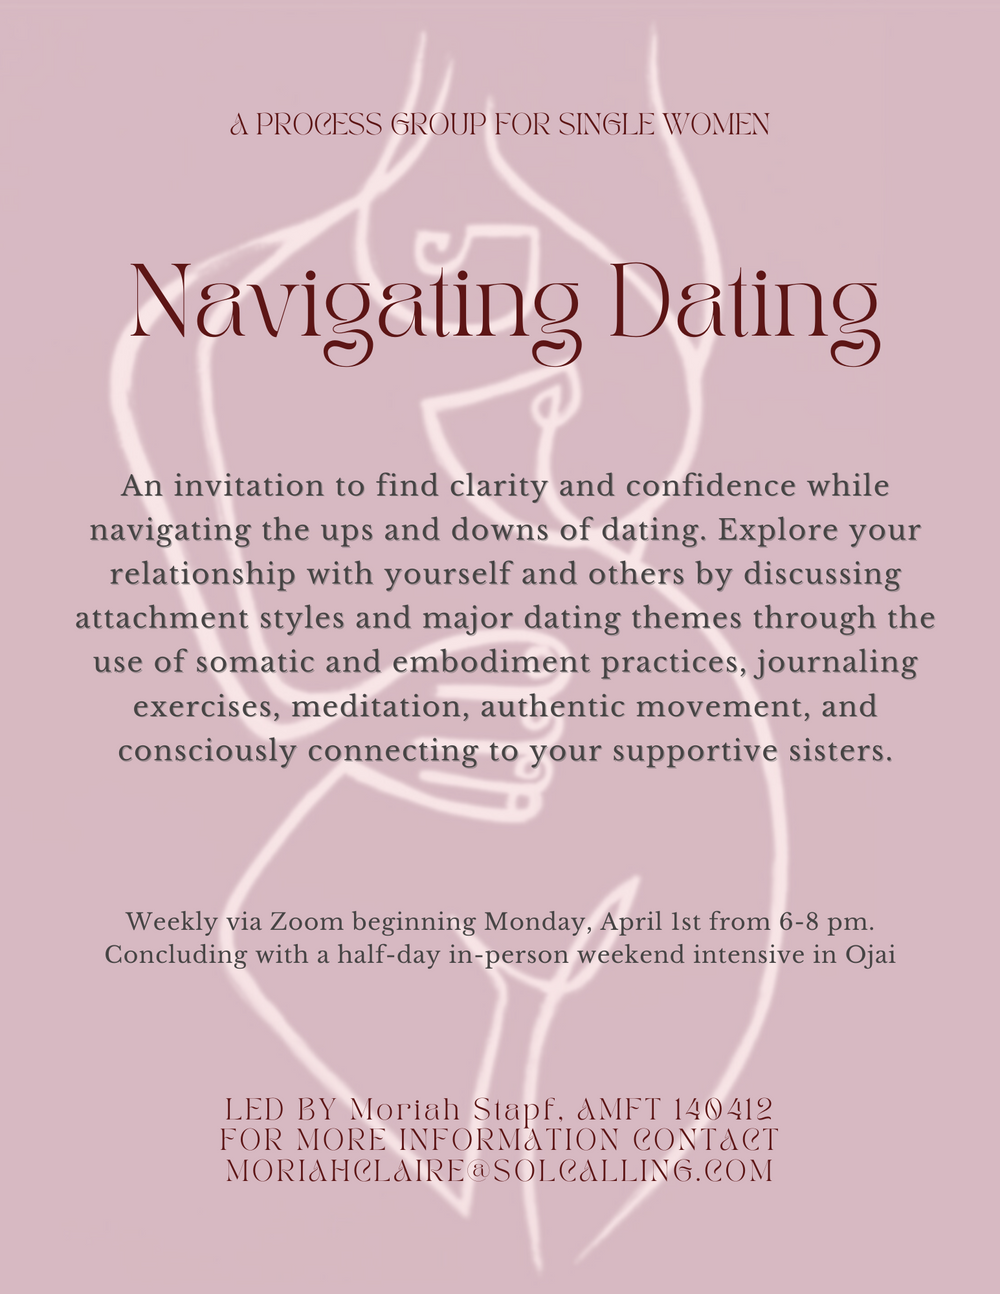 Please reach out if you are interested in learning more about my women's dating group beginning April 1st! 